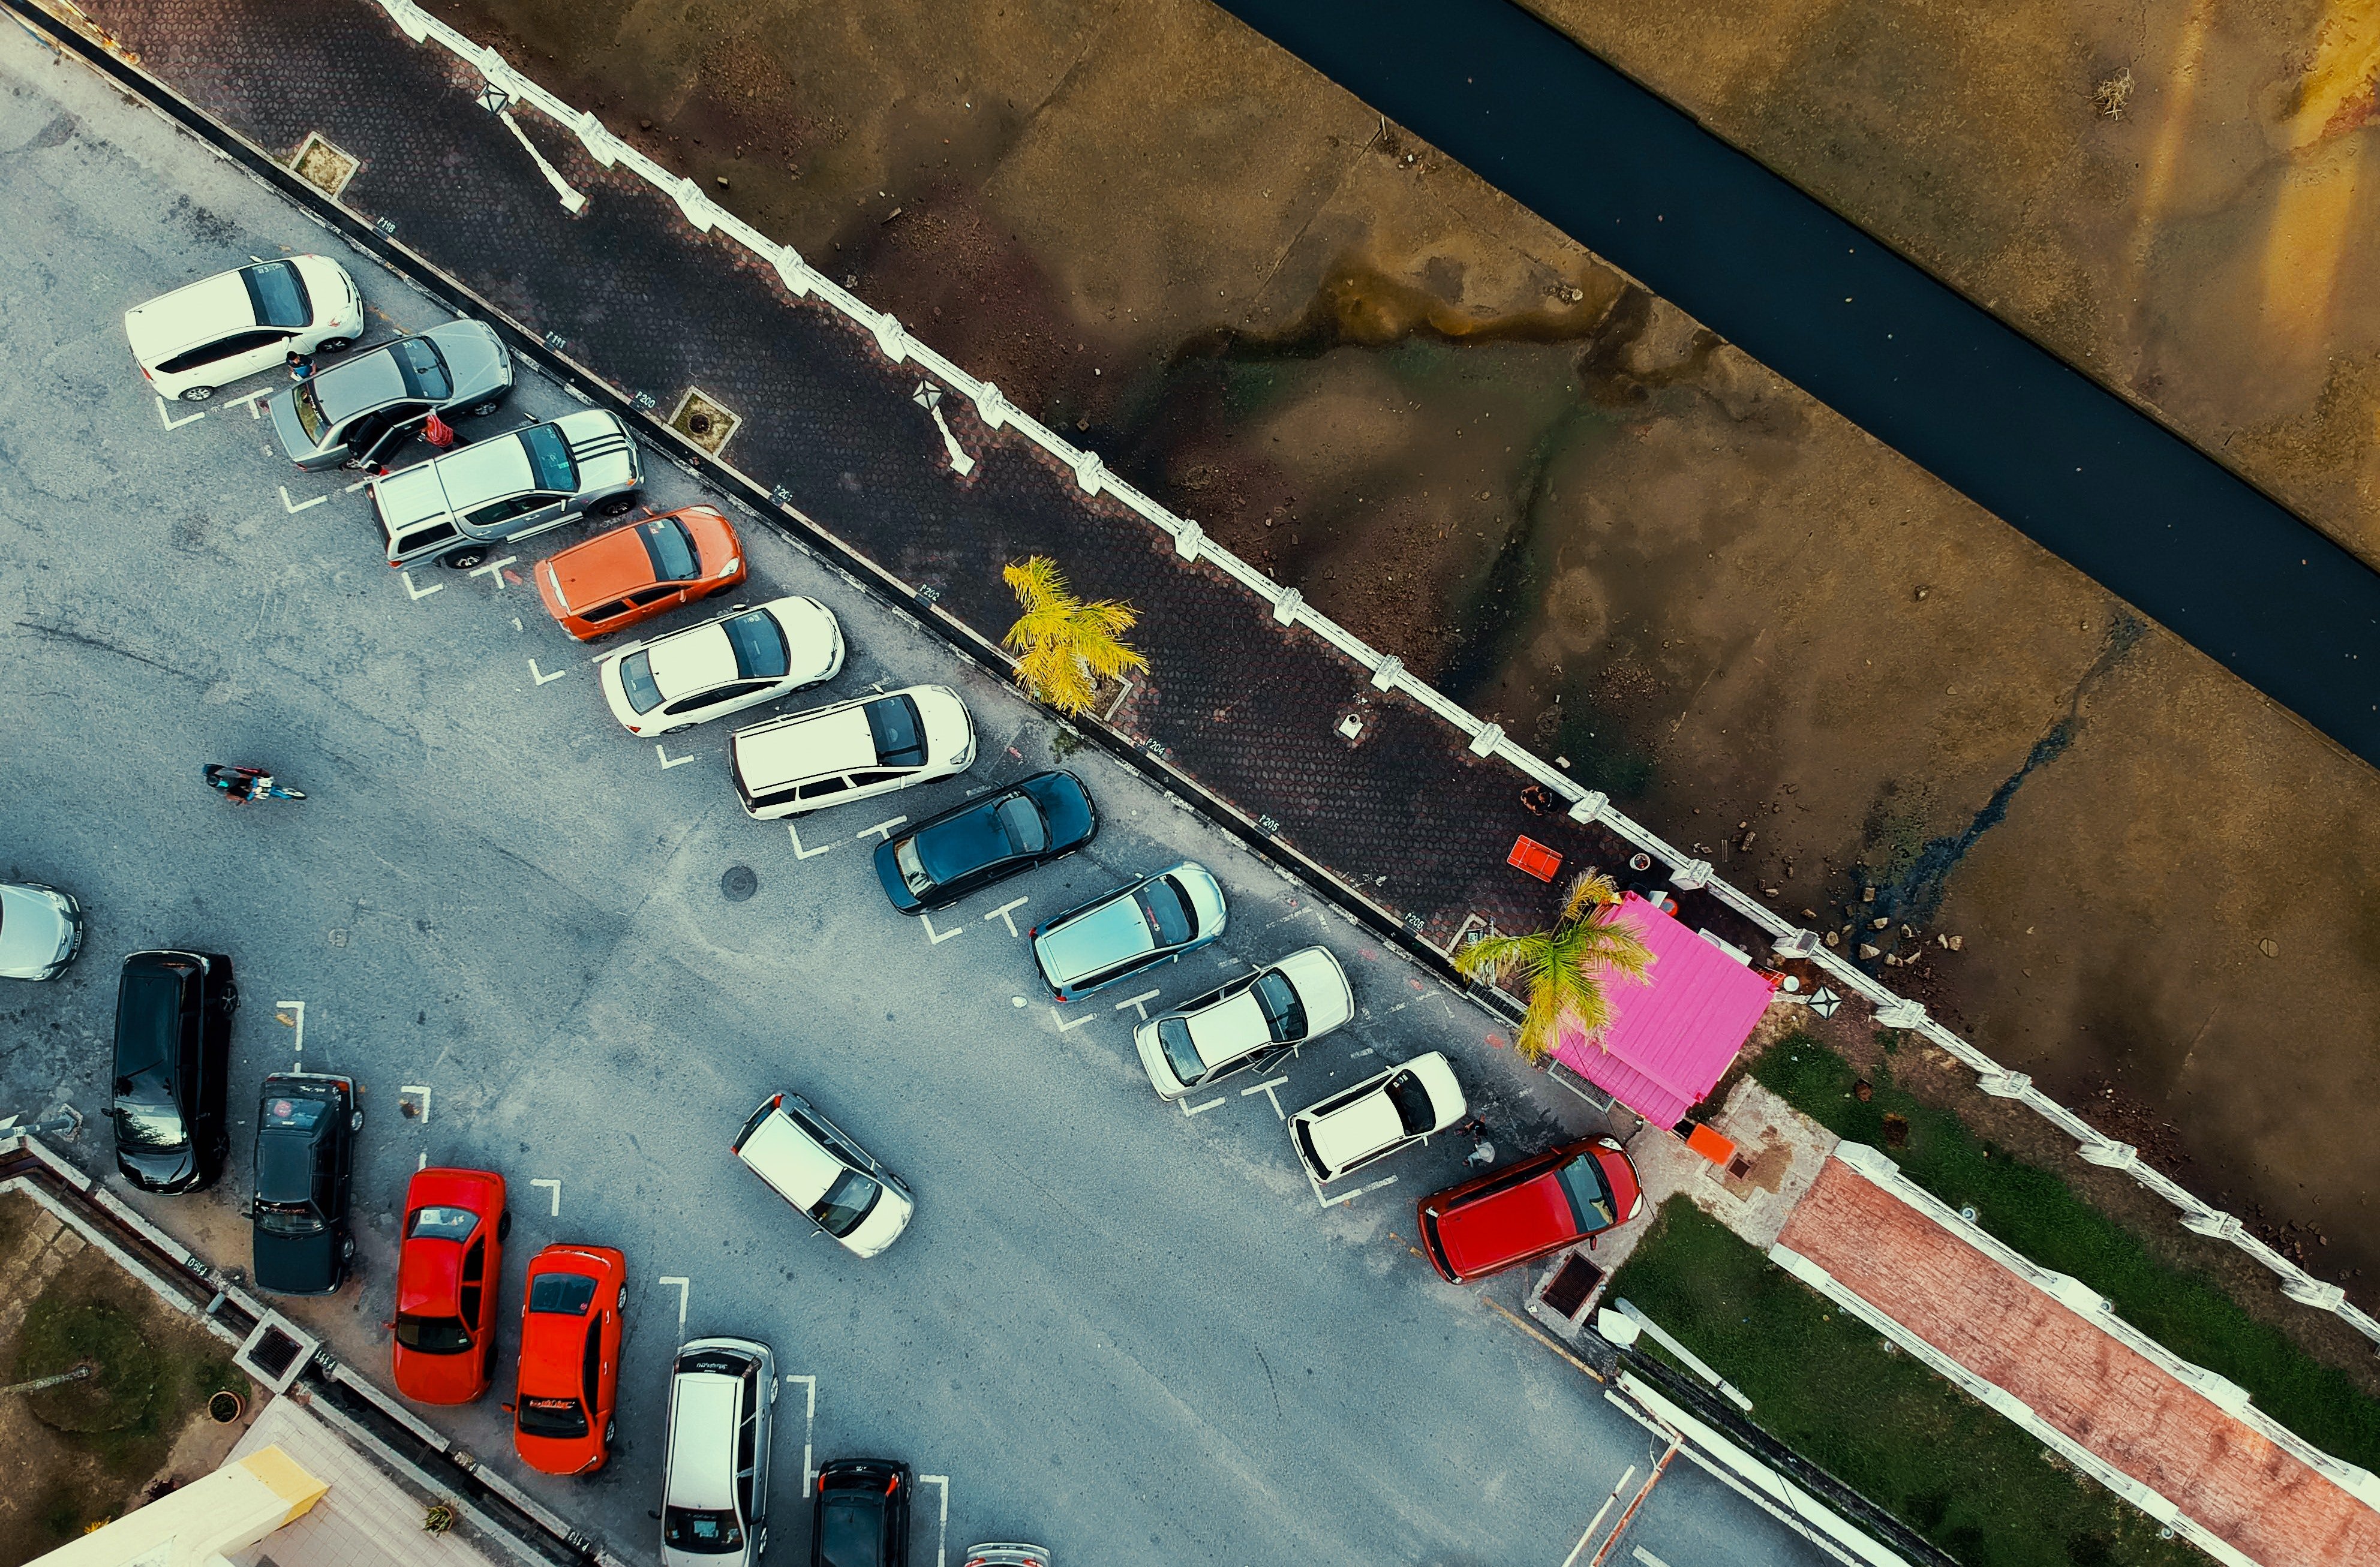 One day, Jack had an idea after seeing cars in the parking lot of a mall.  |  Source: Pexel